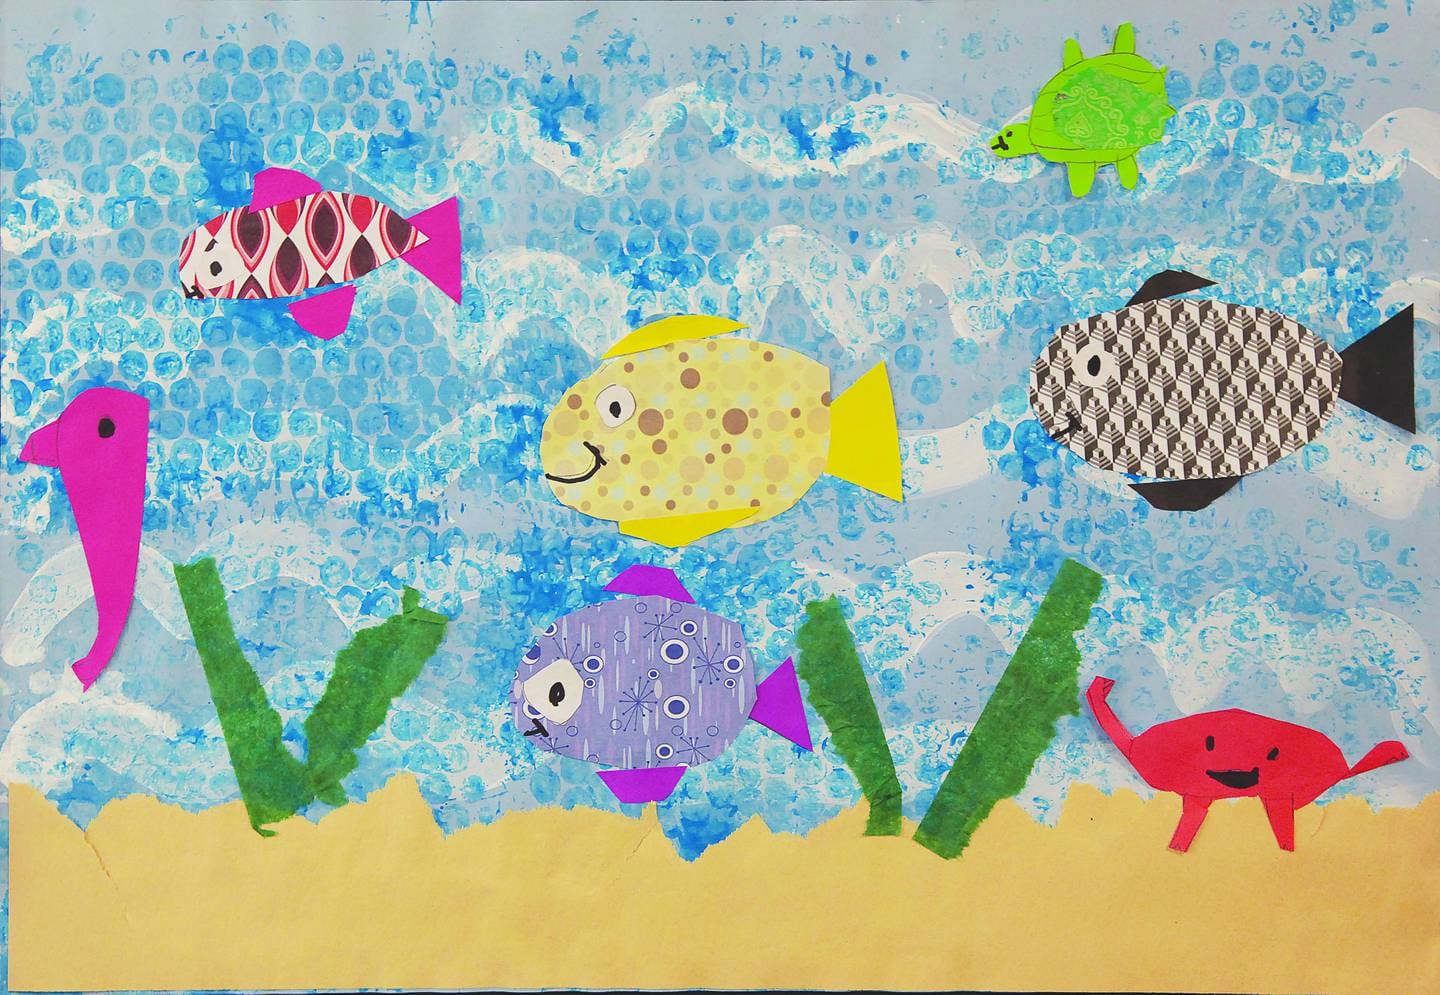 Jovie F., a first grader at Franklin Elementary, Sterling, won first place in the K-4 category with her mixed media piece called “Under the Sea.”